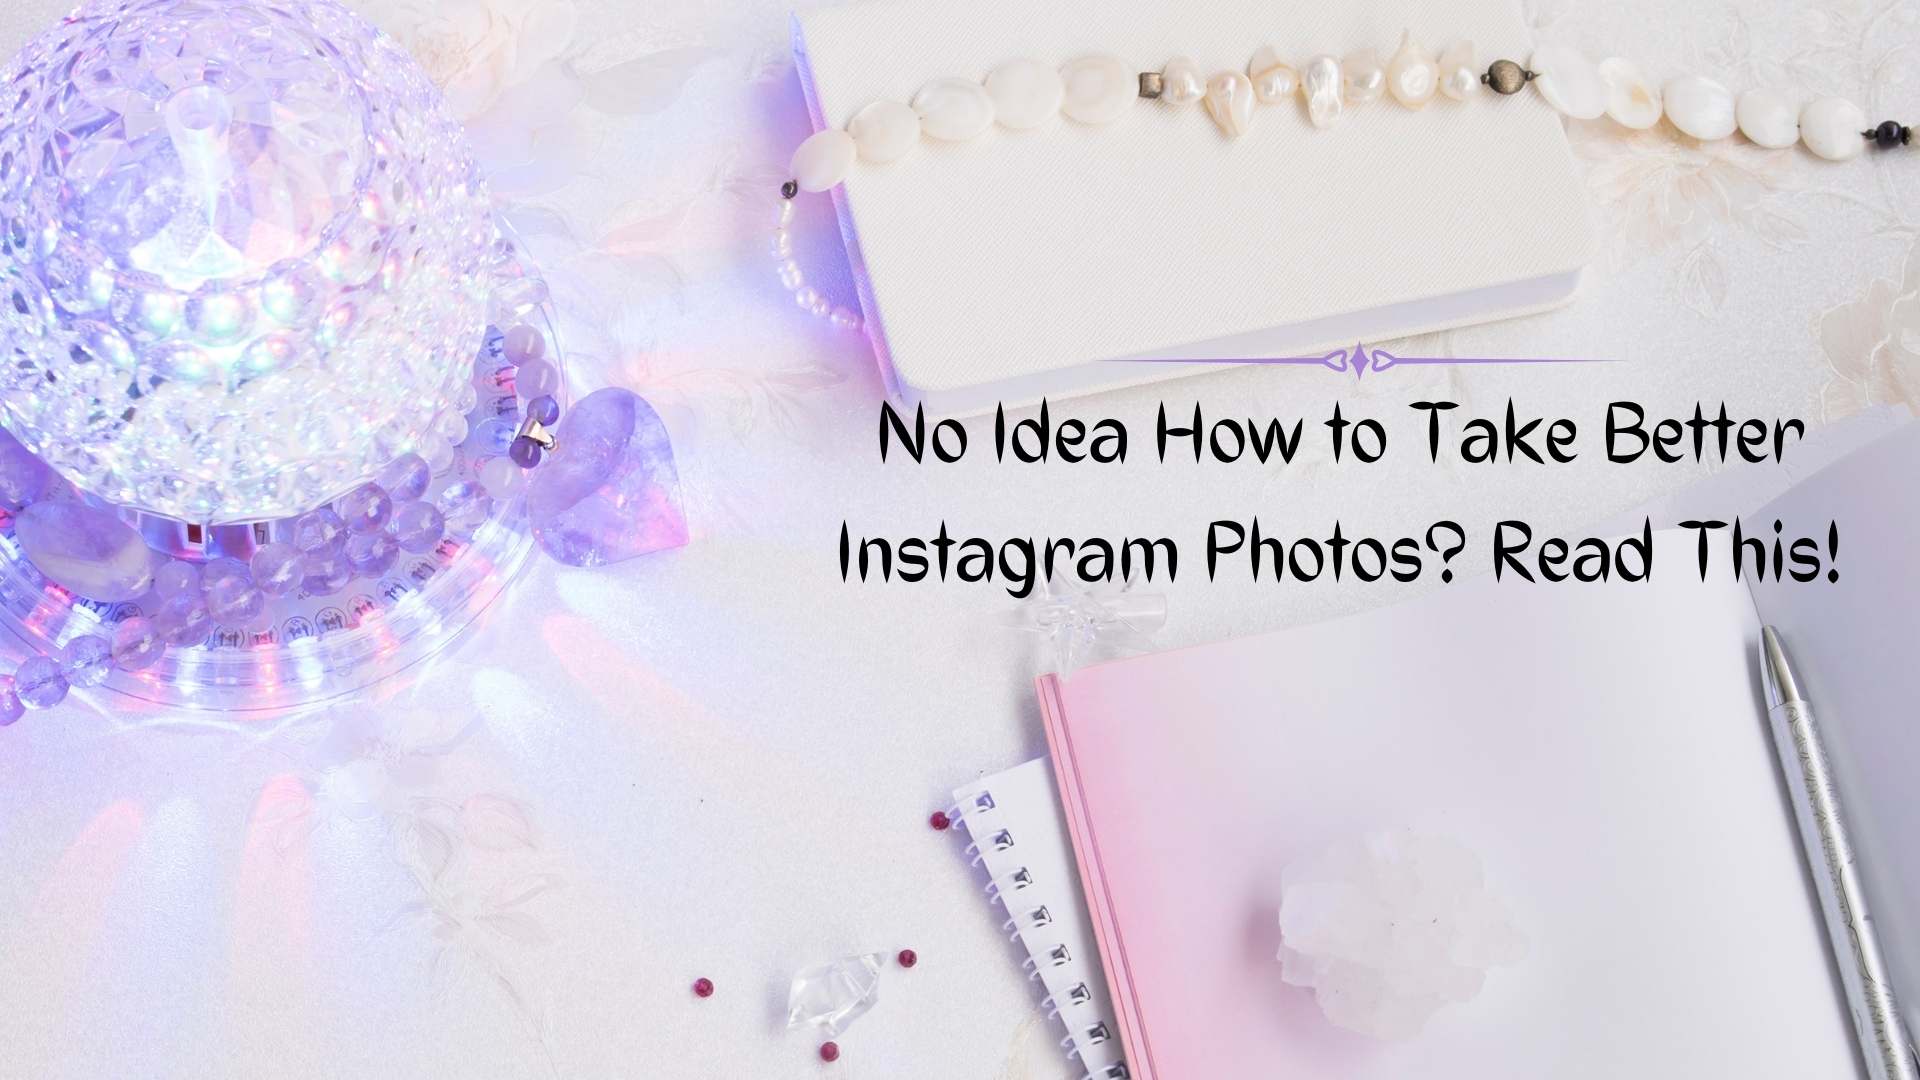 No Idea How to Take Better Instagram Photos? Read this!